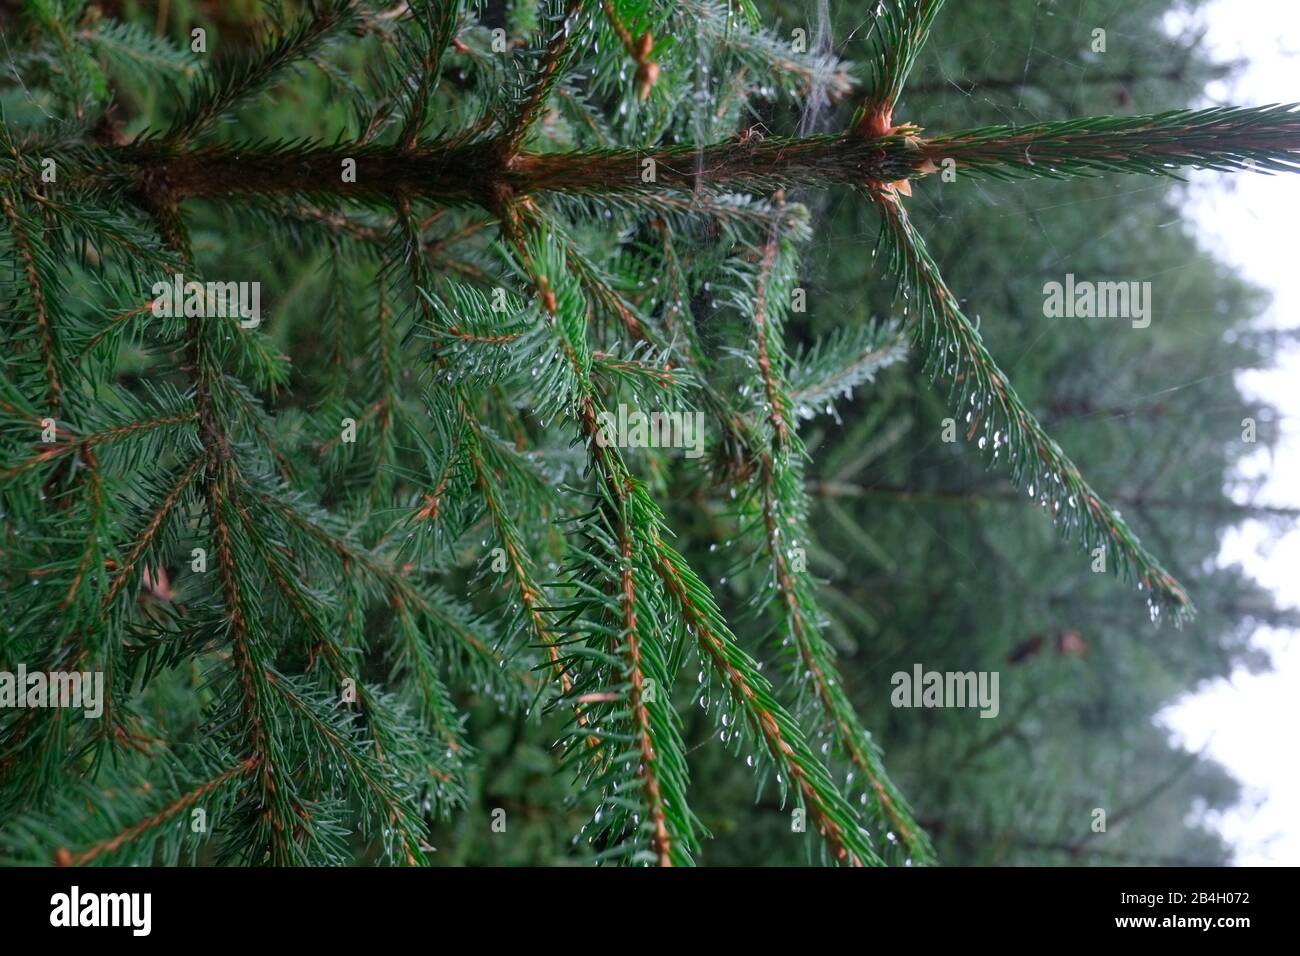 Spruce tree covered with rain drops Stock Photo